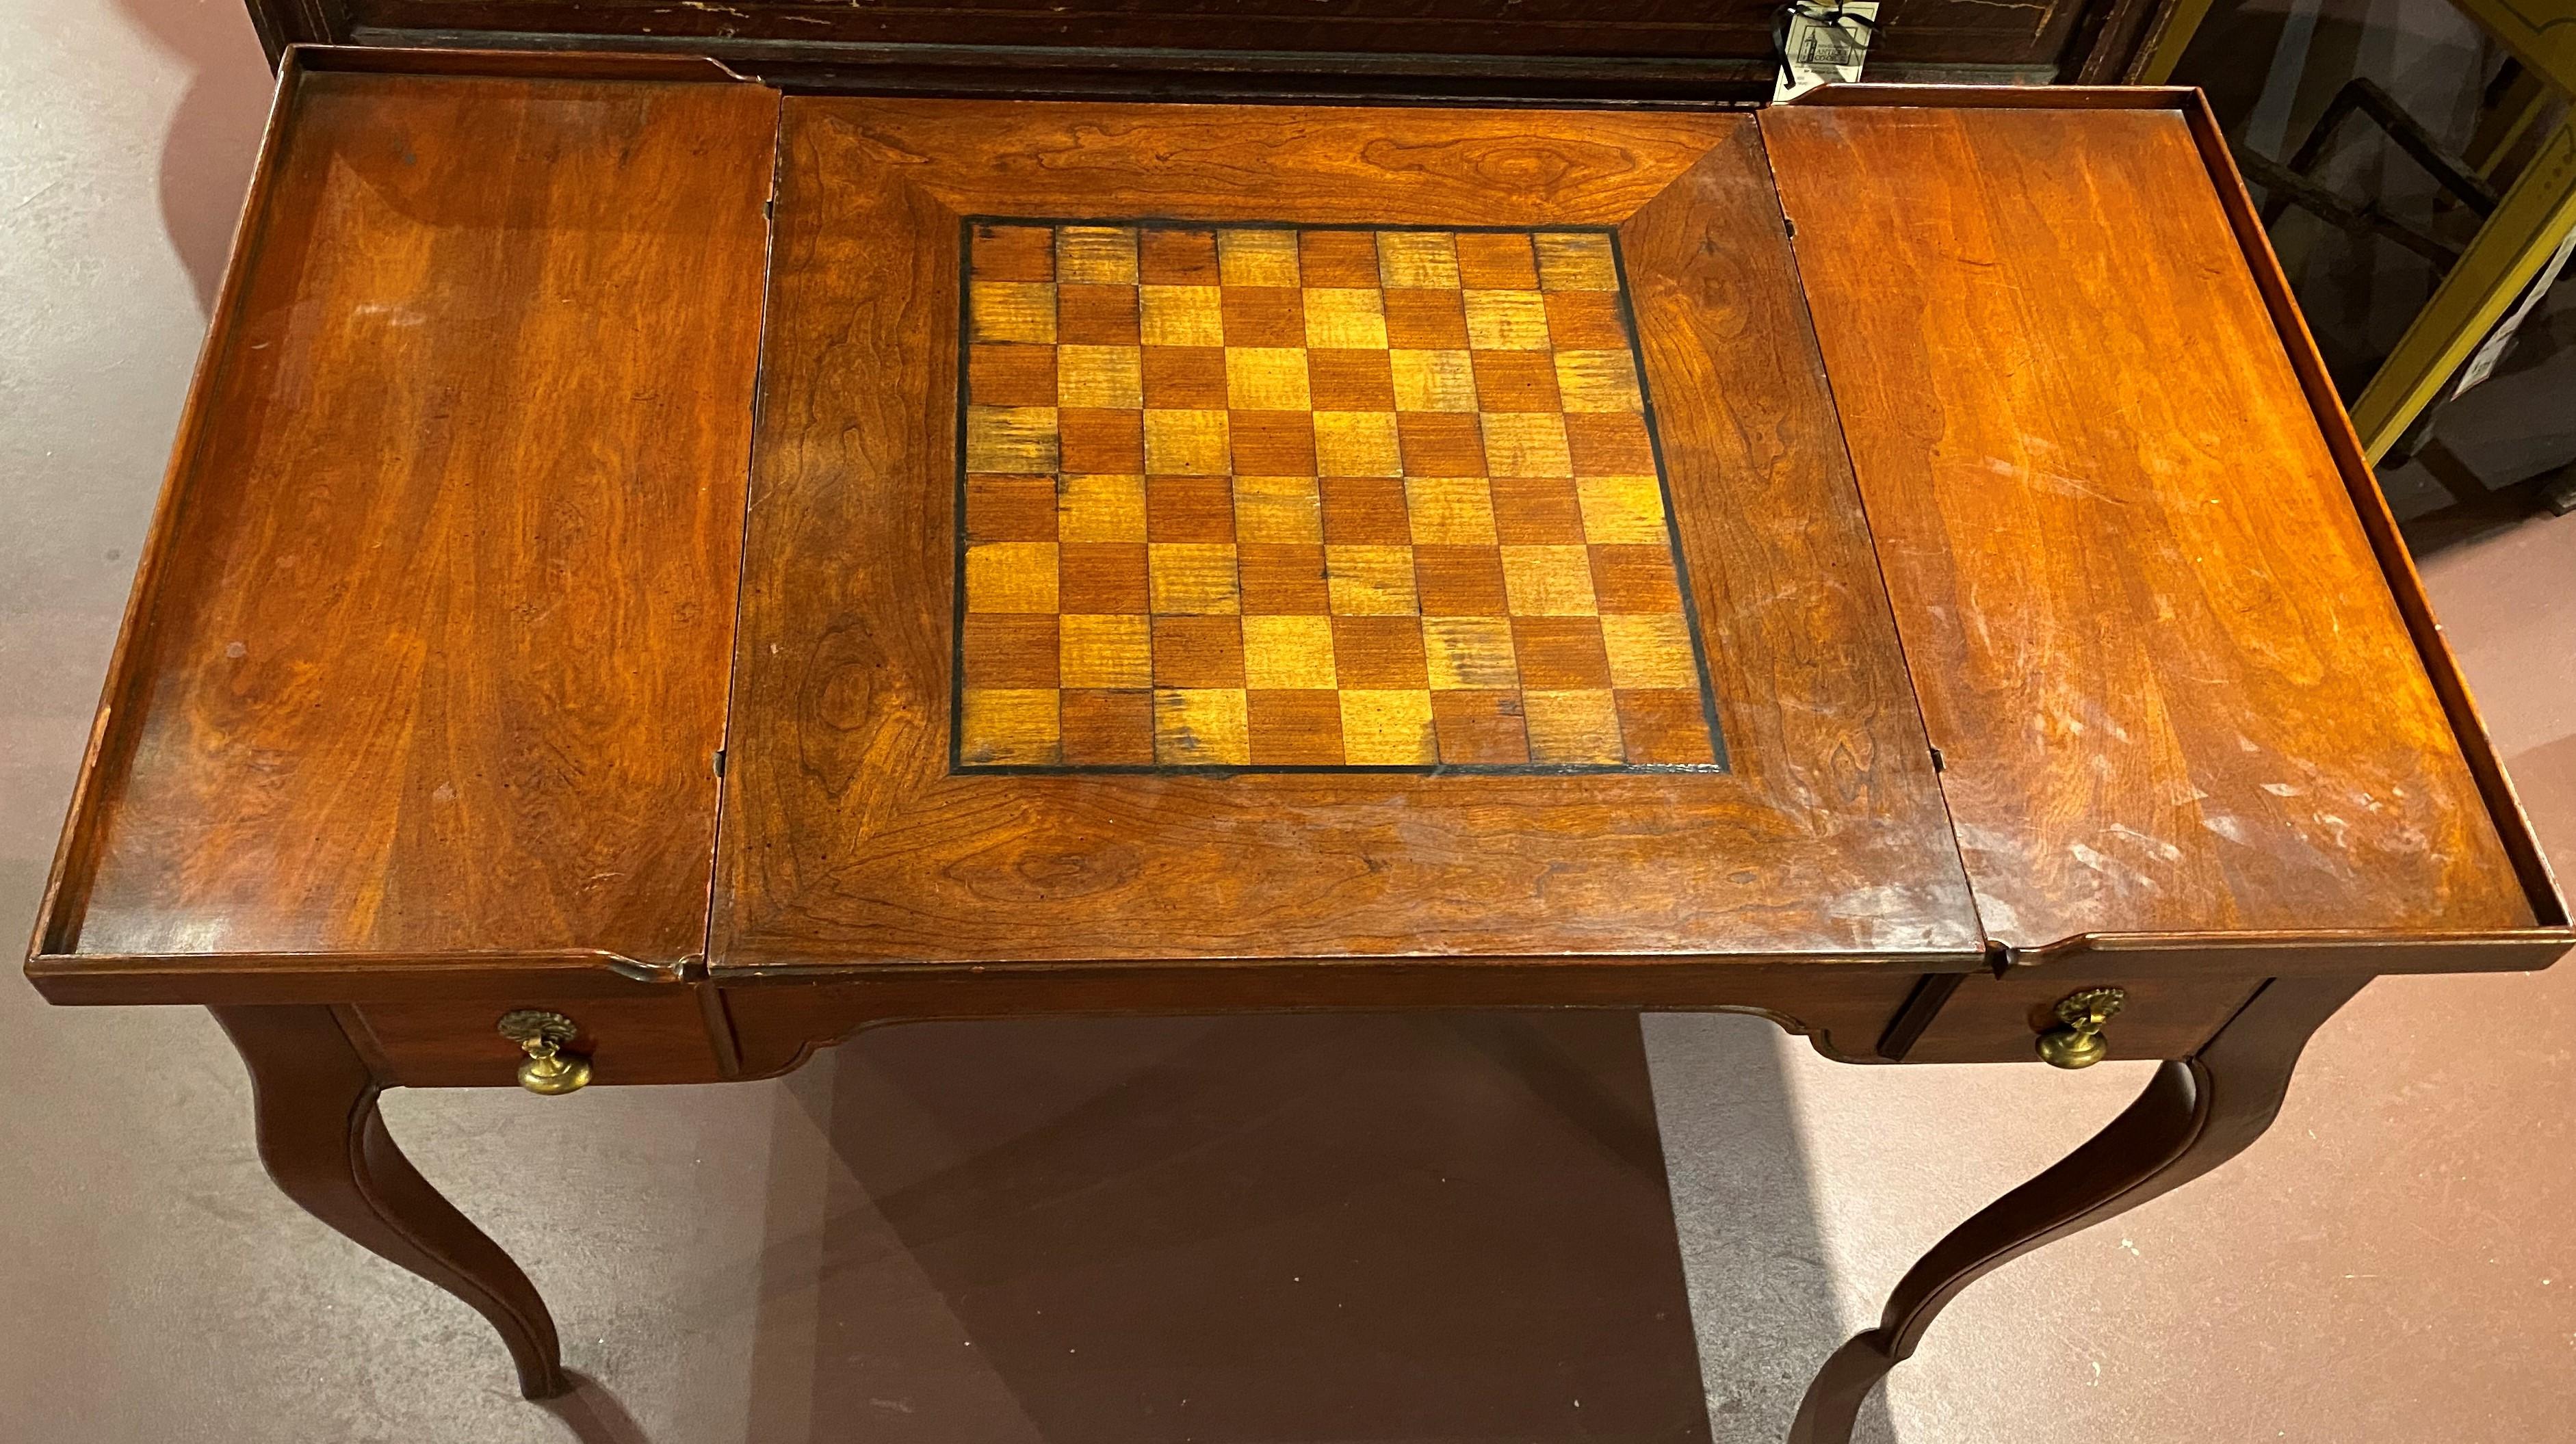 A fine example of a fruitwood gaming table in the Louis XV style, with removable and reversible satinwood inlaid chessboard center top, which opens to a backgammon compartment below. The table has two fitted drawers on each side with decorative